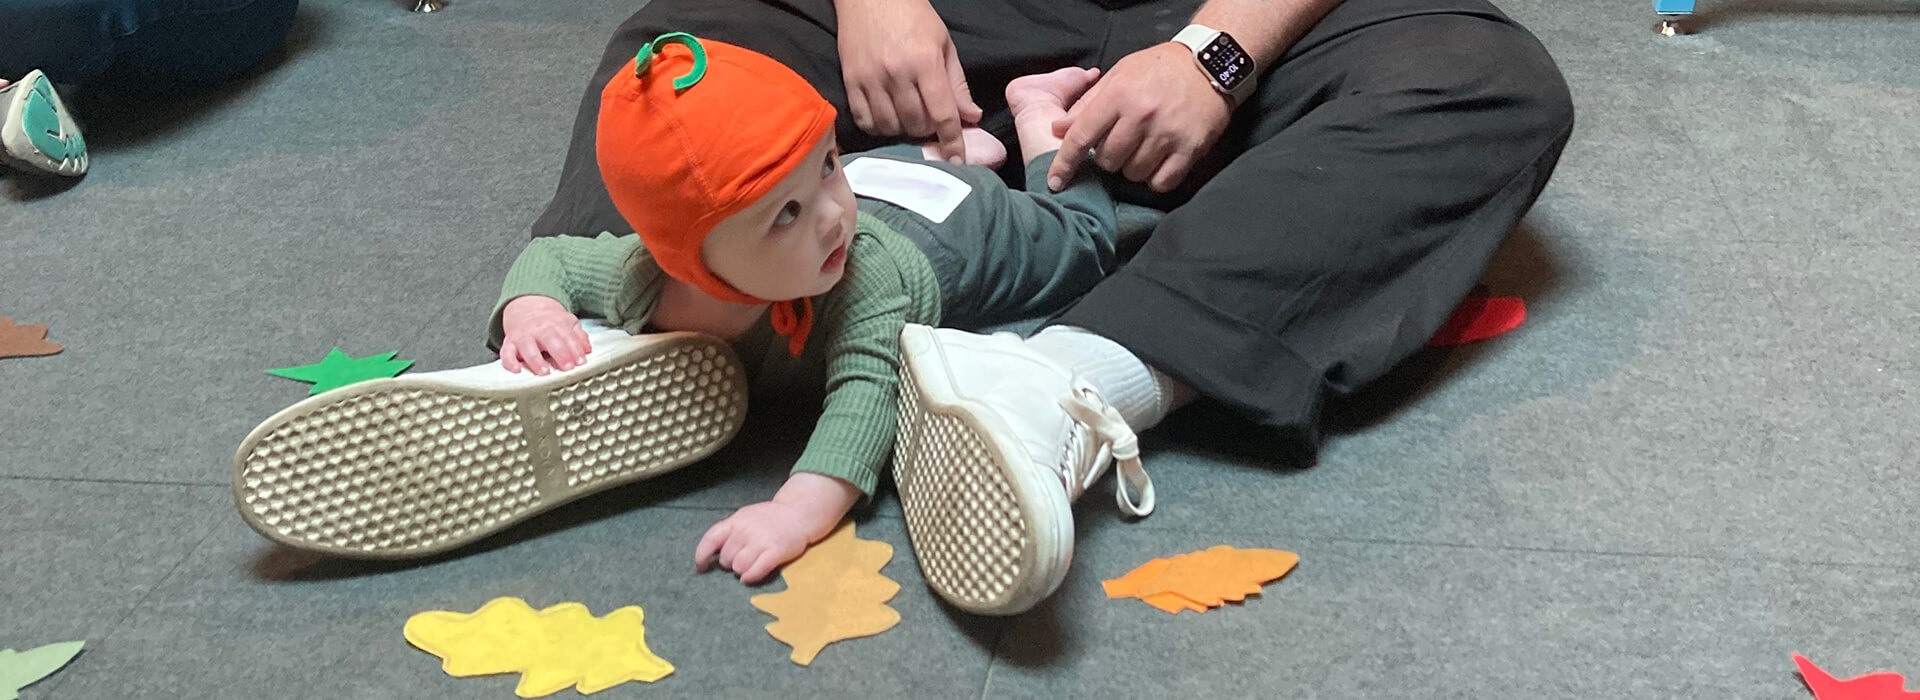 A man sits on the floor with his baby who is wearing a pumpkin hat